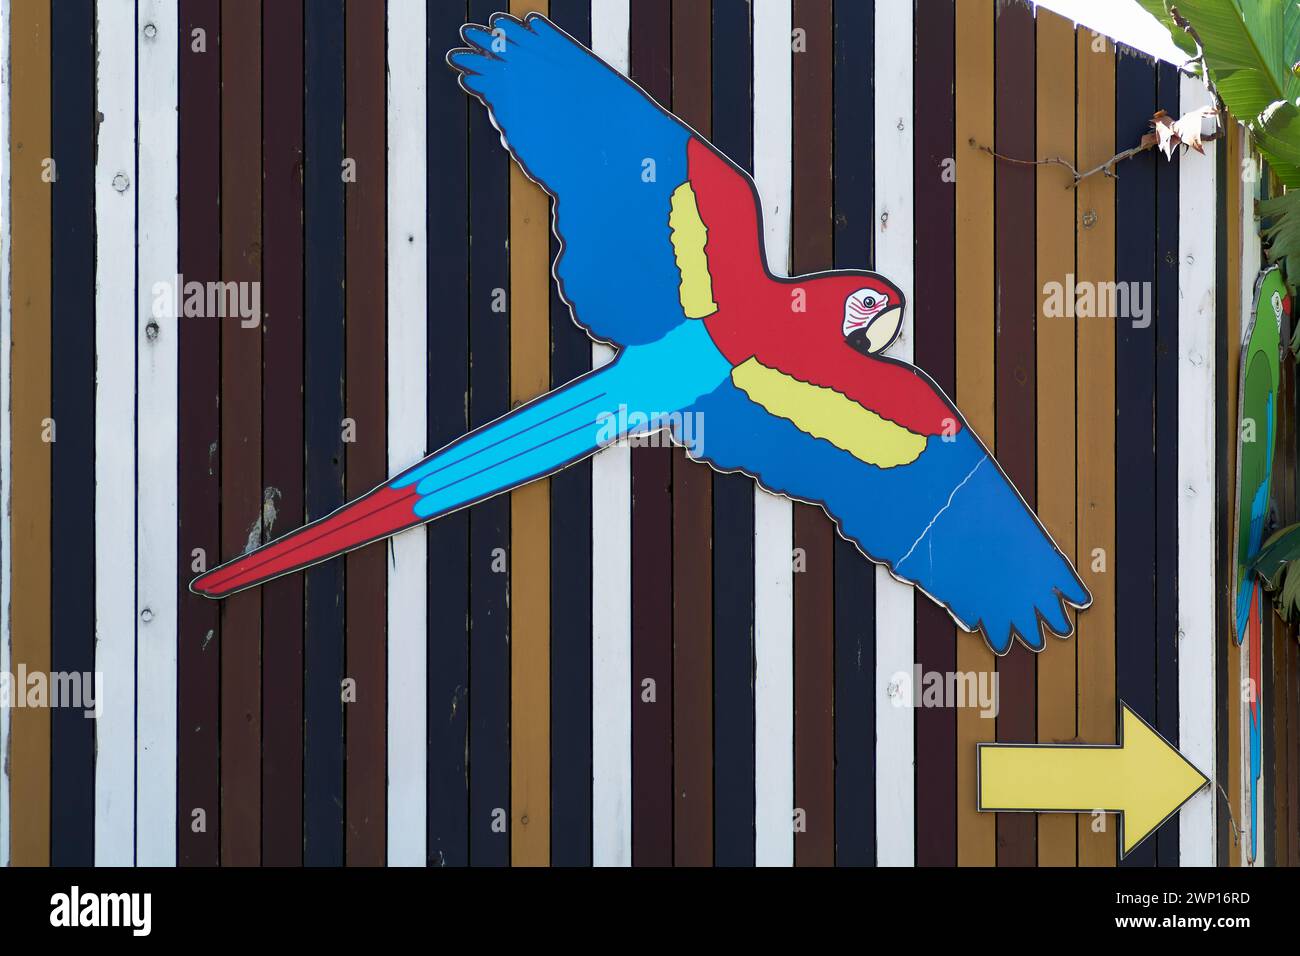 Colorful parrot in mid-flight against a striped wooden backdrop. Stock Photo